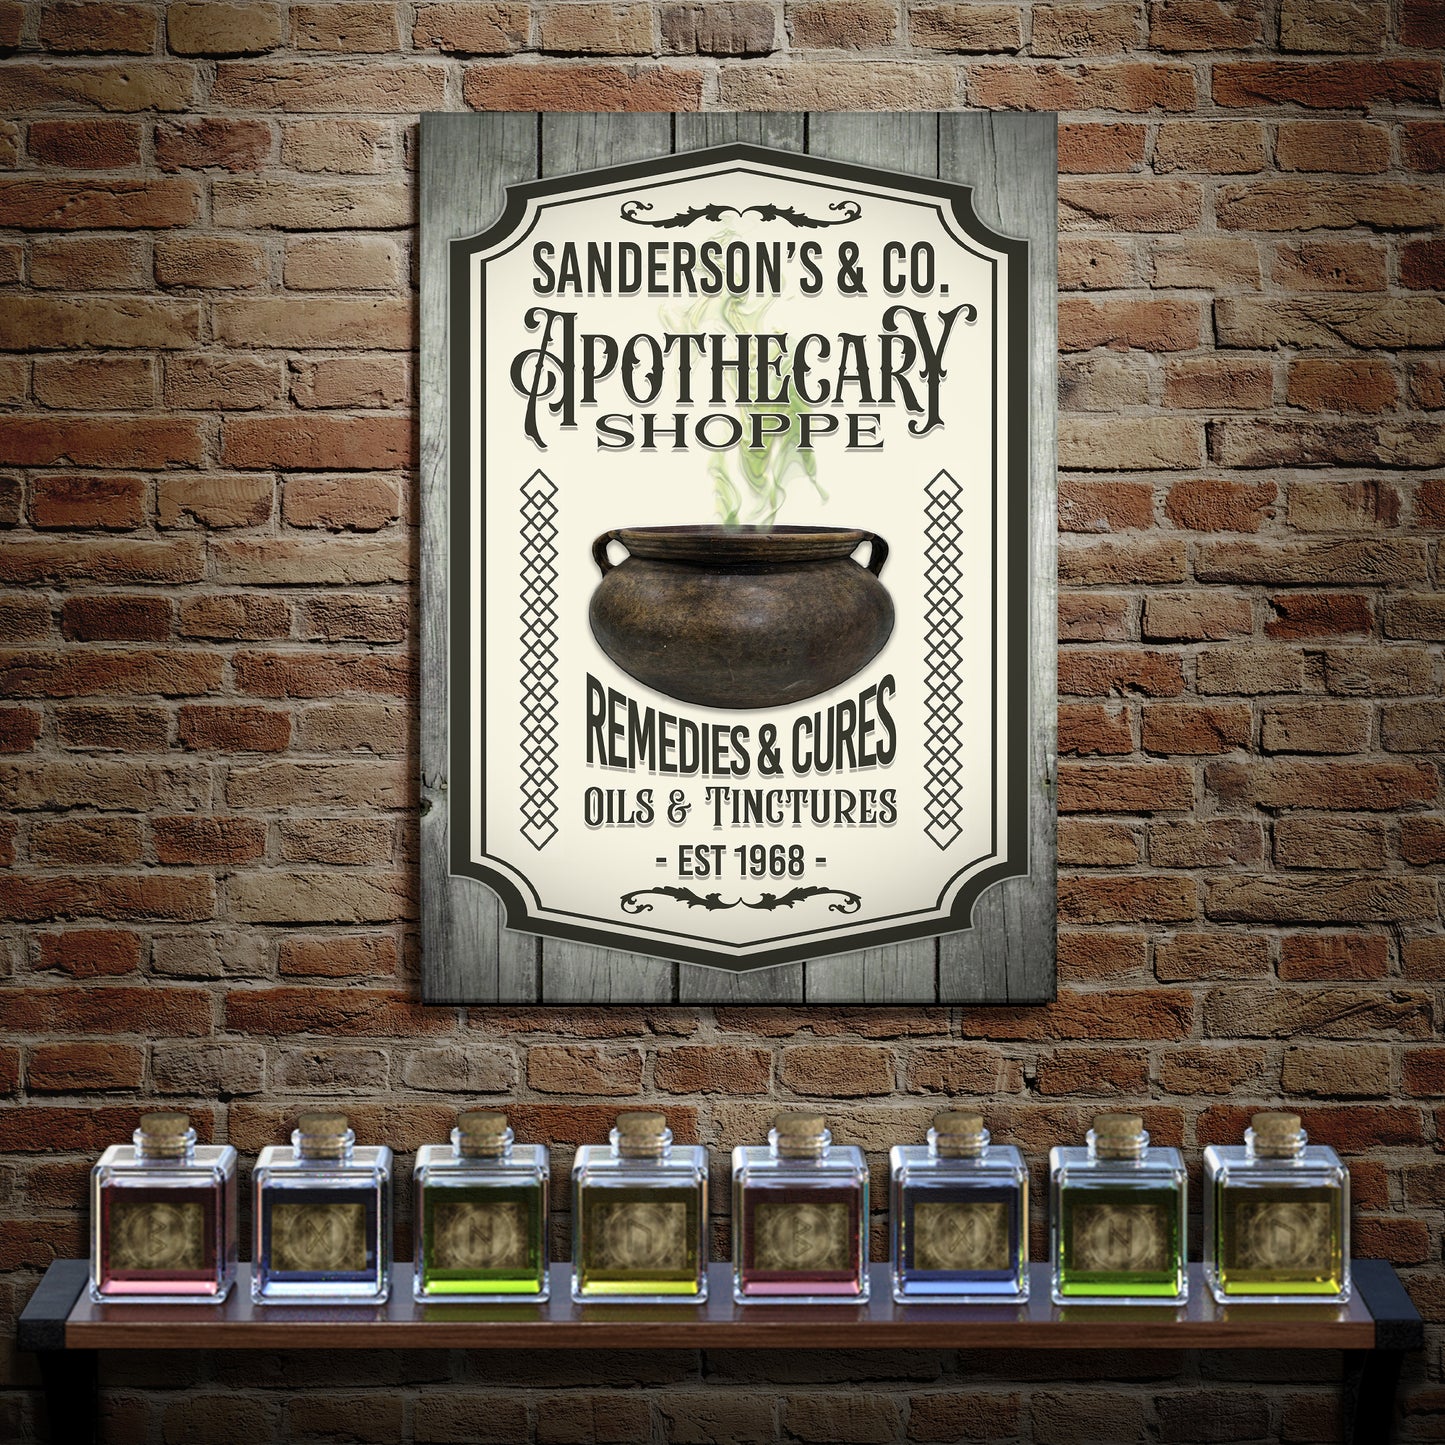 Apothecary Shoppe Sign Style 1 - Imaged by Tailored Canvases